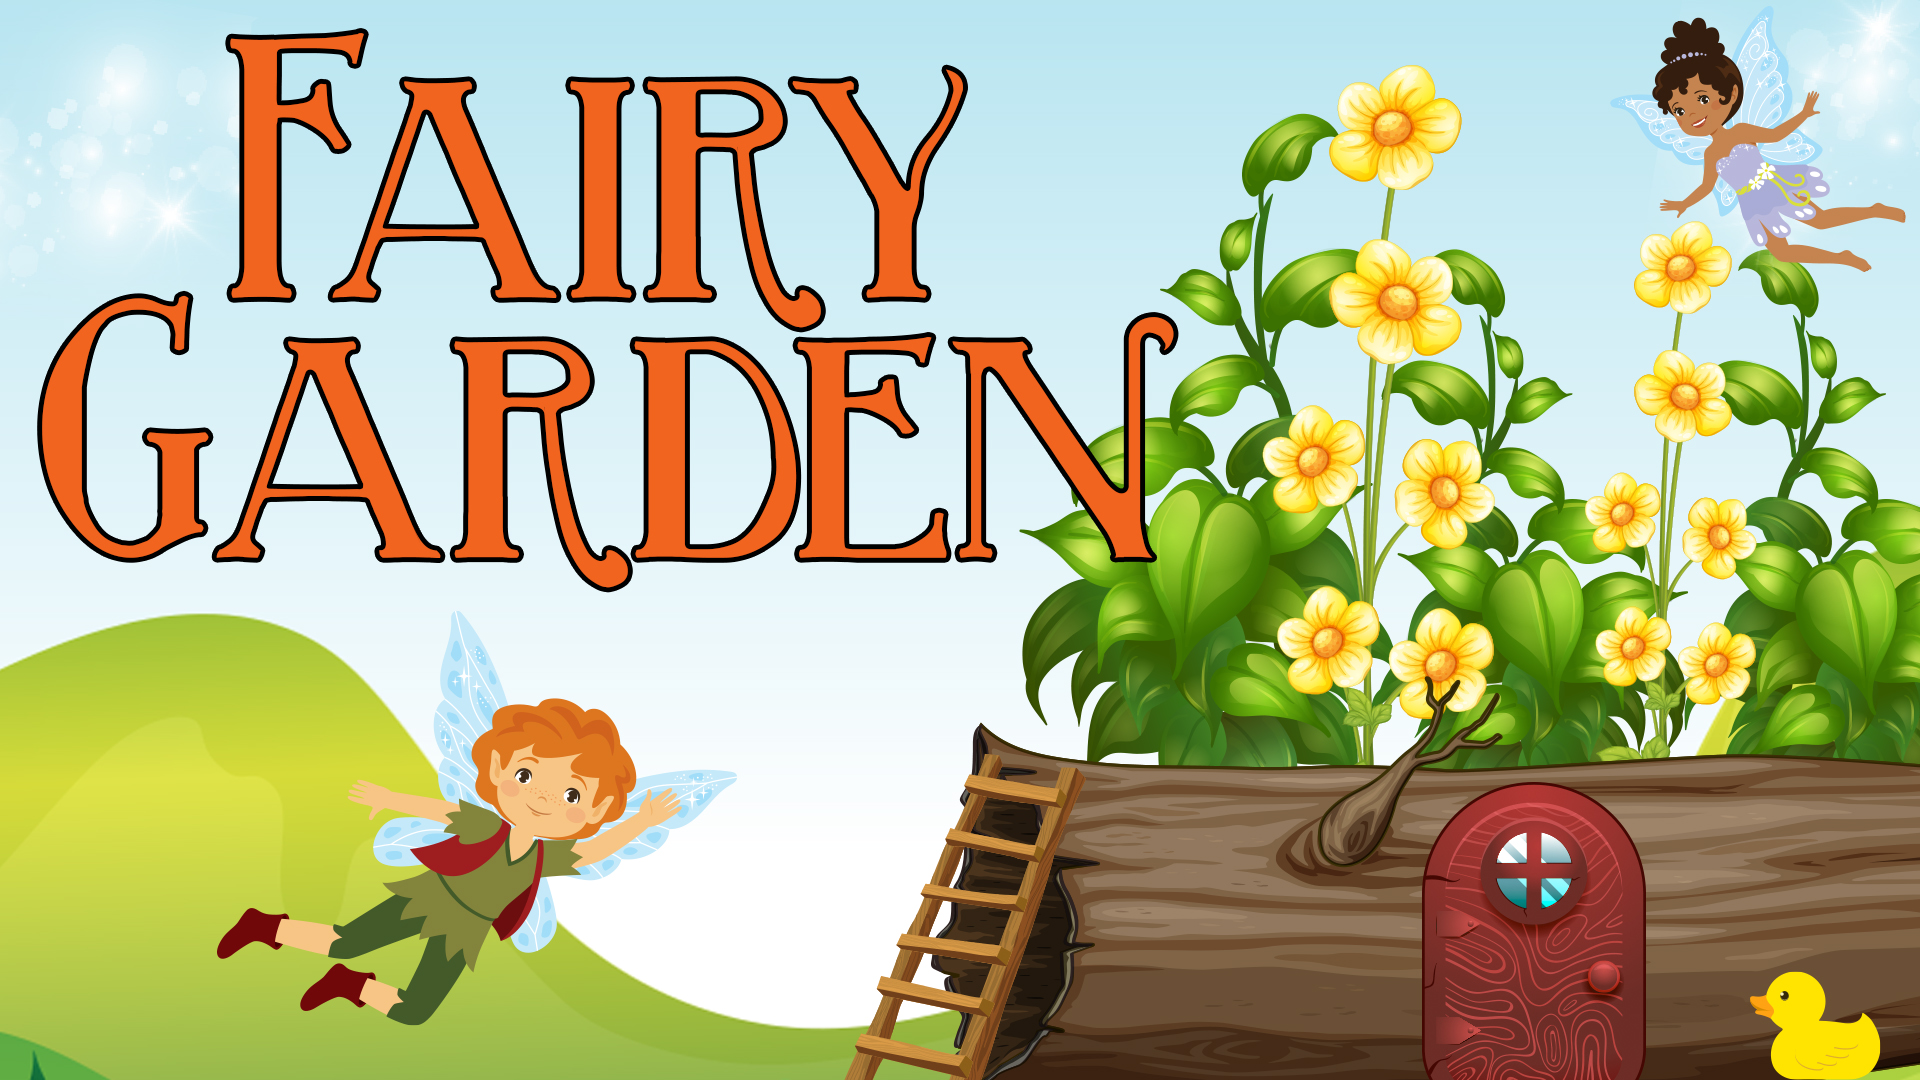 Image reads "Fairy Garden" against an outdoor background. A log with flowers on it is to the right of the title. A door is on the front of the log with a duck right beside it and a ladder leans against the end of the log. A male fairy is under the title and a female fairy is to the right of the title above the log.